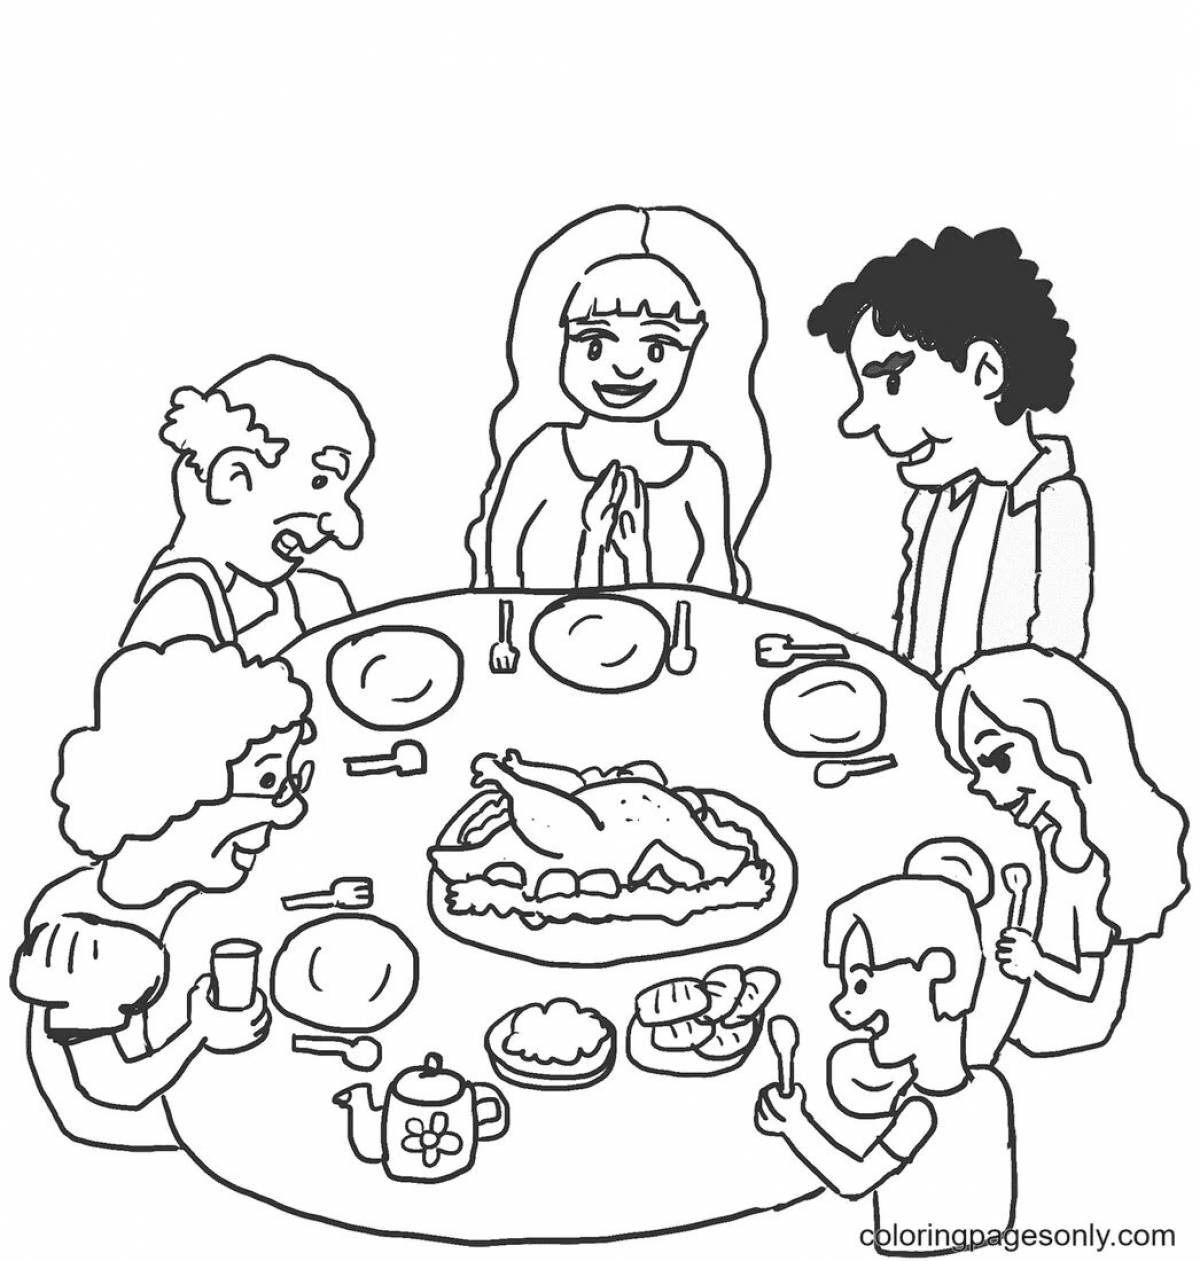 Family at the table #14